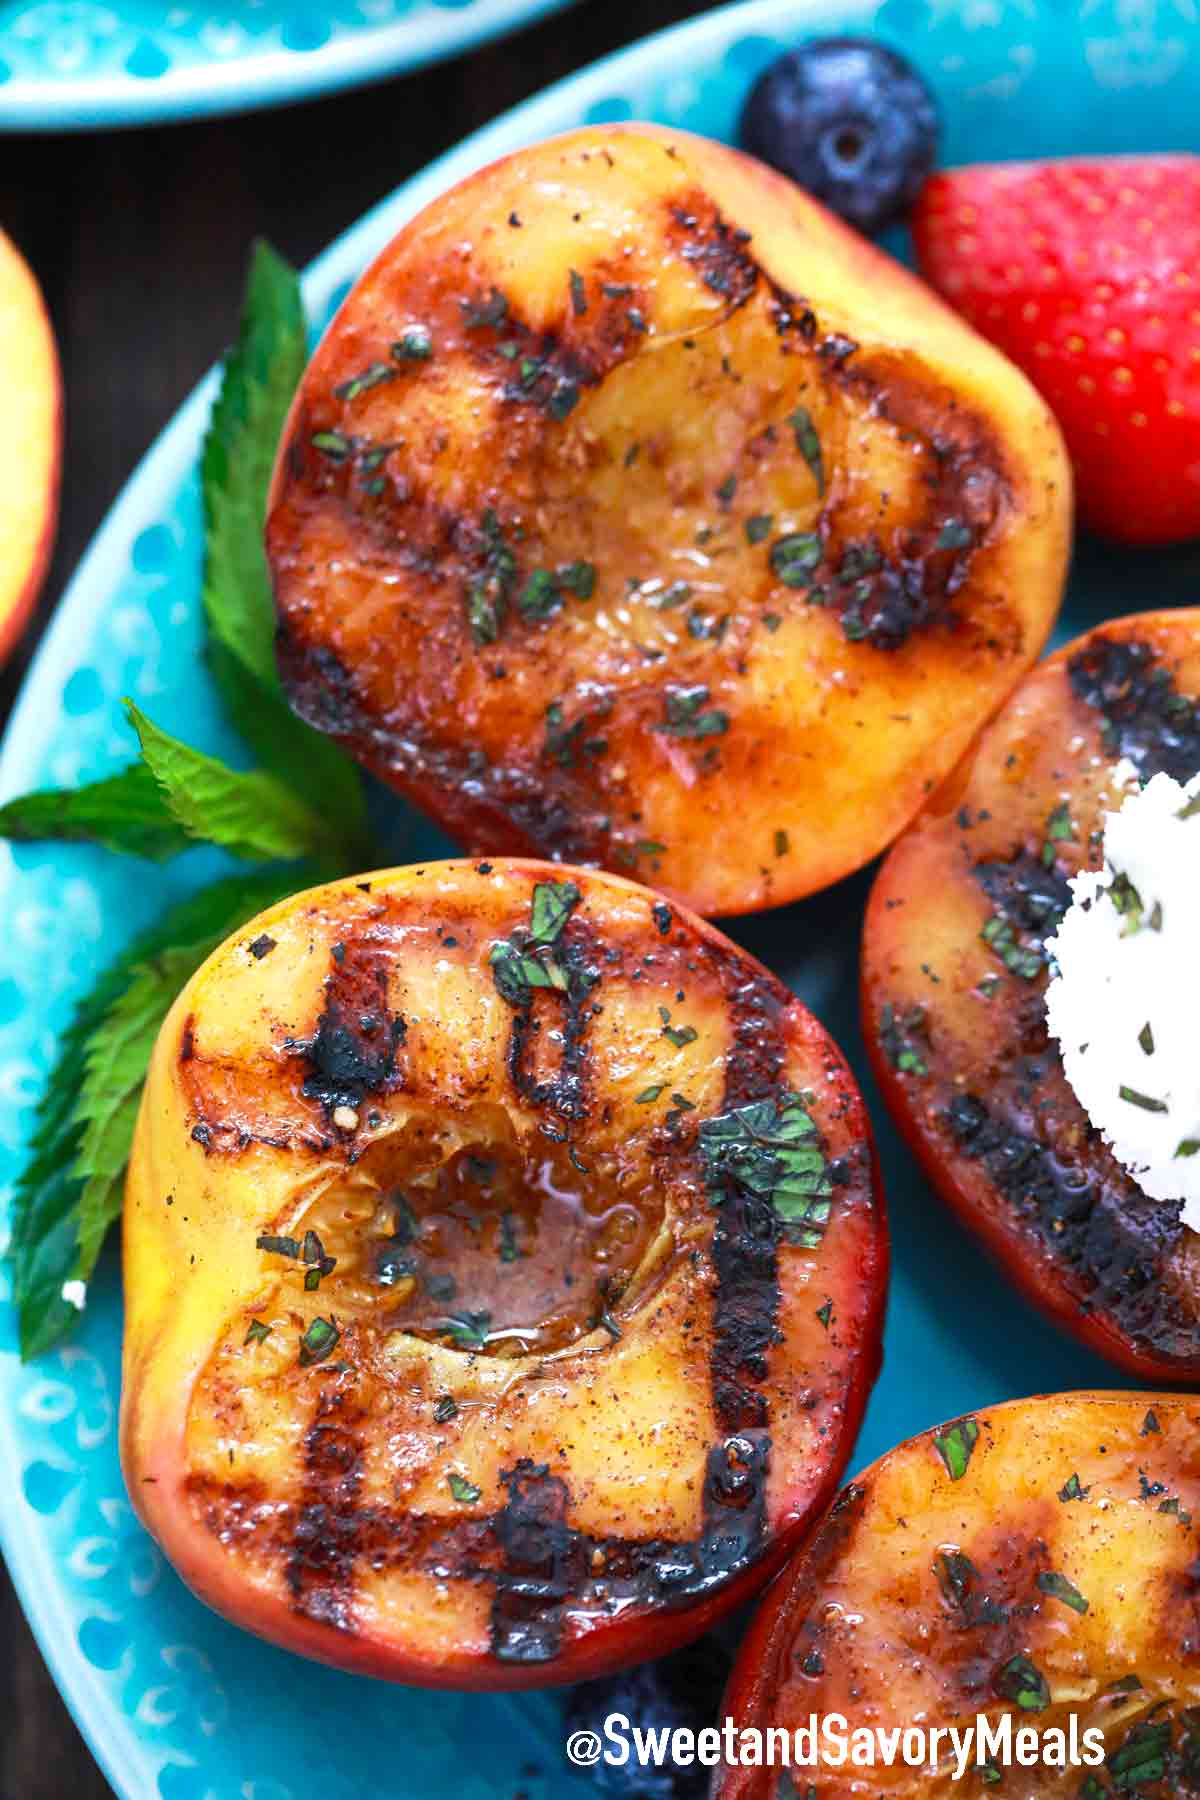 Grilled Peaches Recipe [Video] - Sweet and Savory Meals